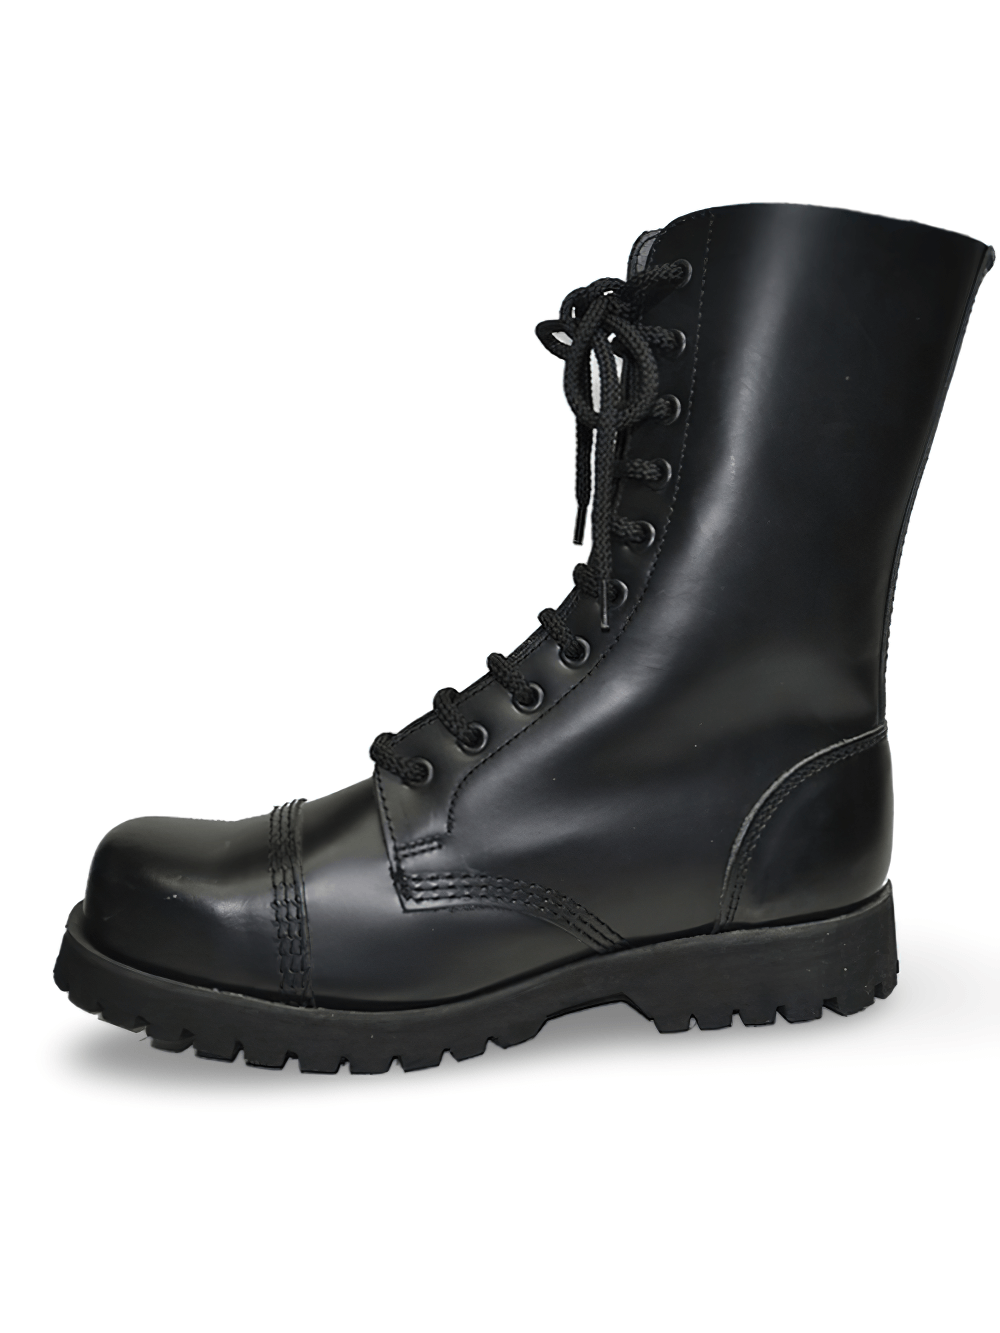 Unisex Military 10-Eyelet Steel Toe Ankle Boots